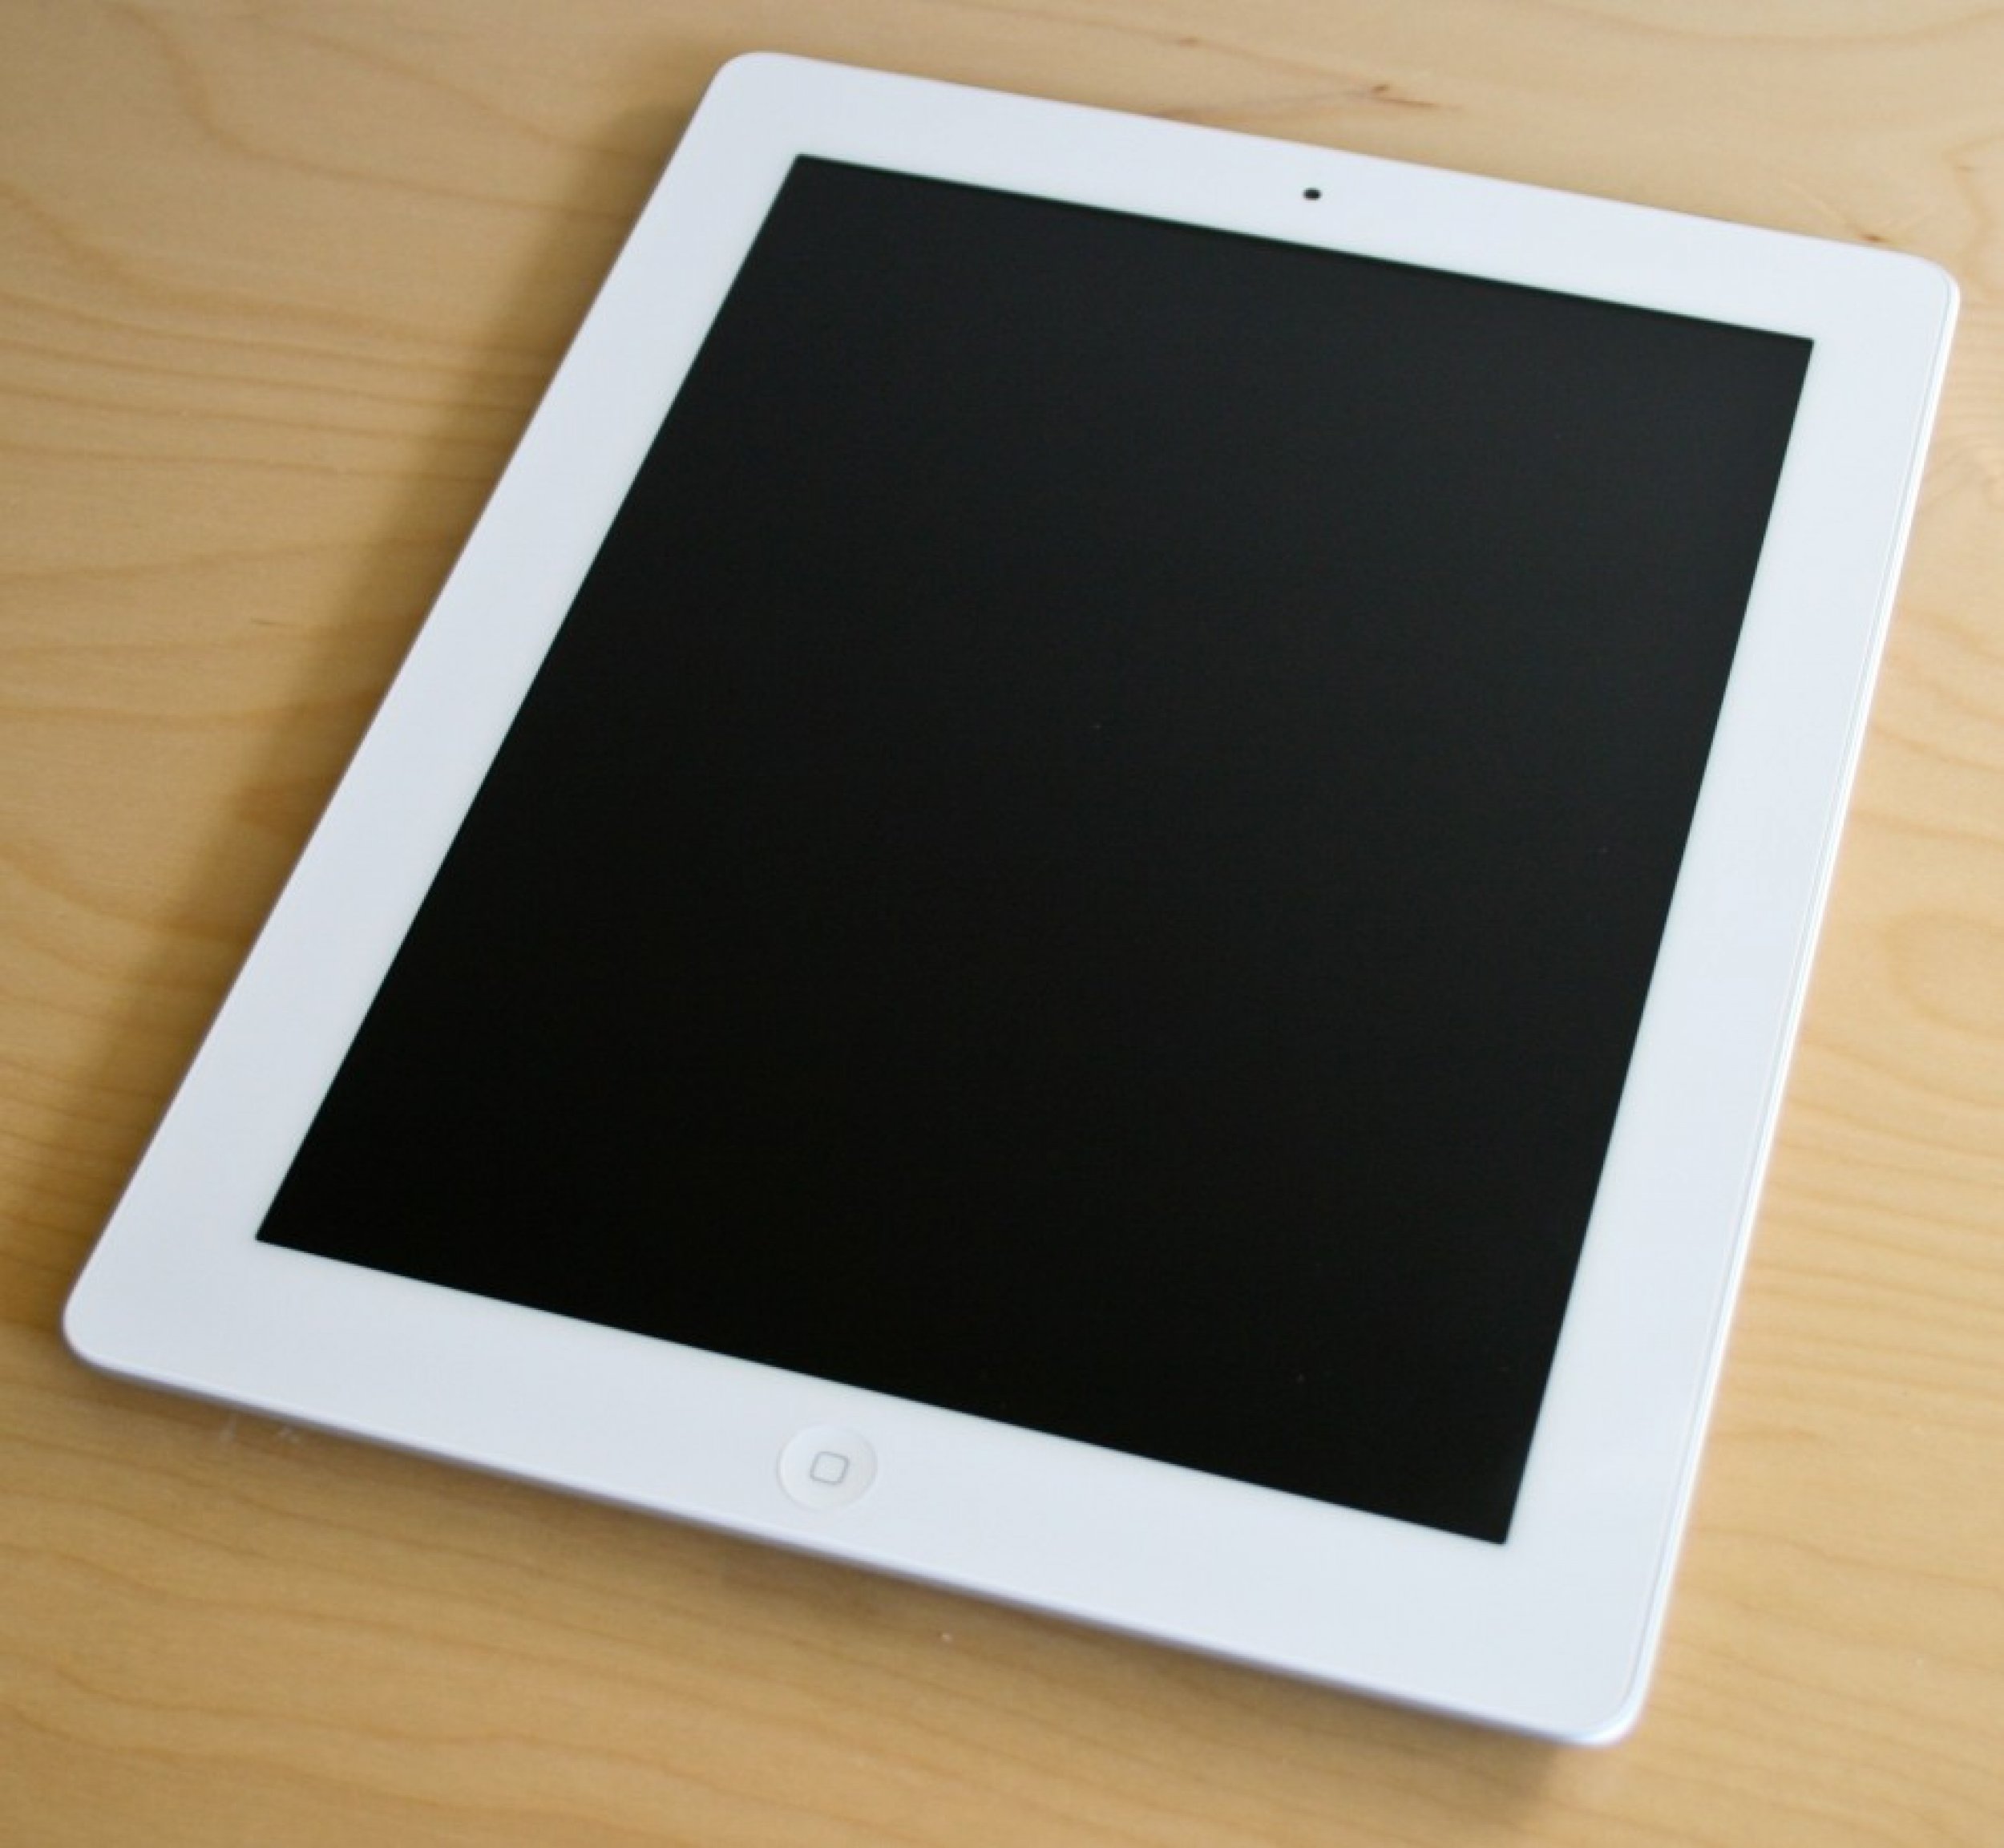 iPad 3 will debut with 4G LTE option